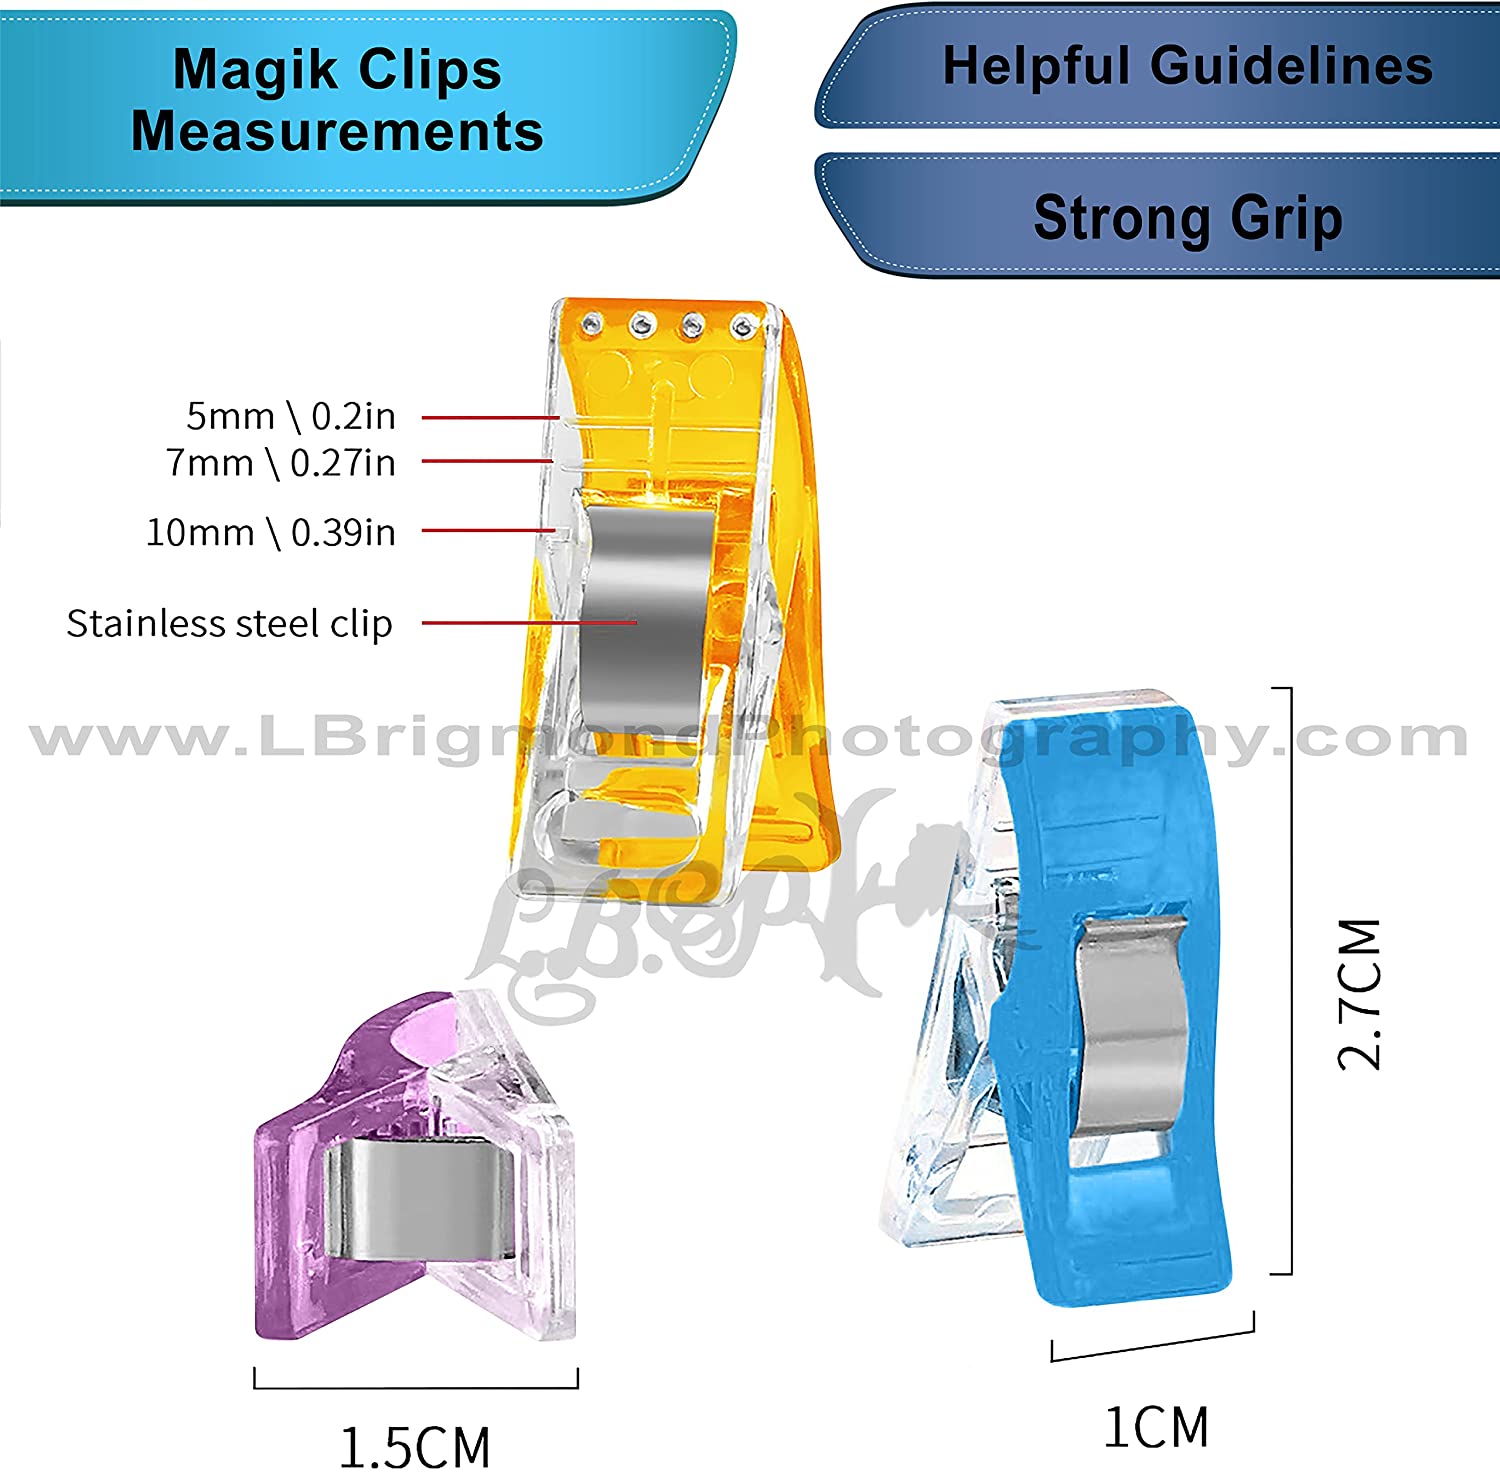 Magik Clips - Sewing Clips for Quilting and Crafts - 100 Pack Multicolored